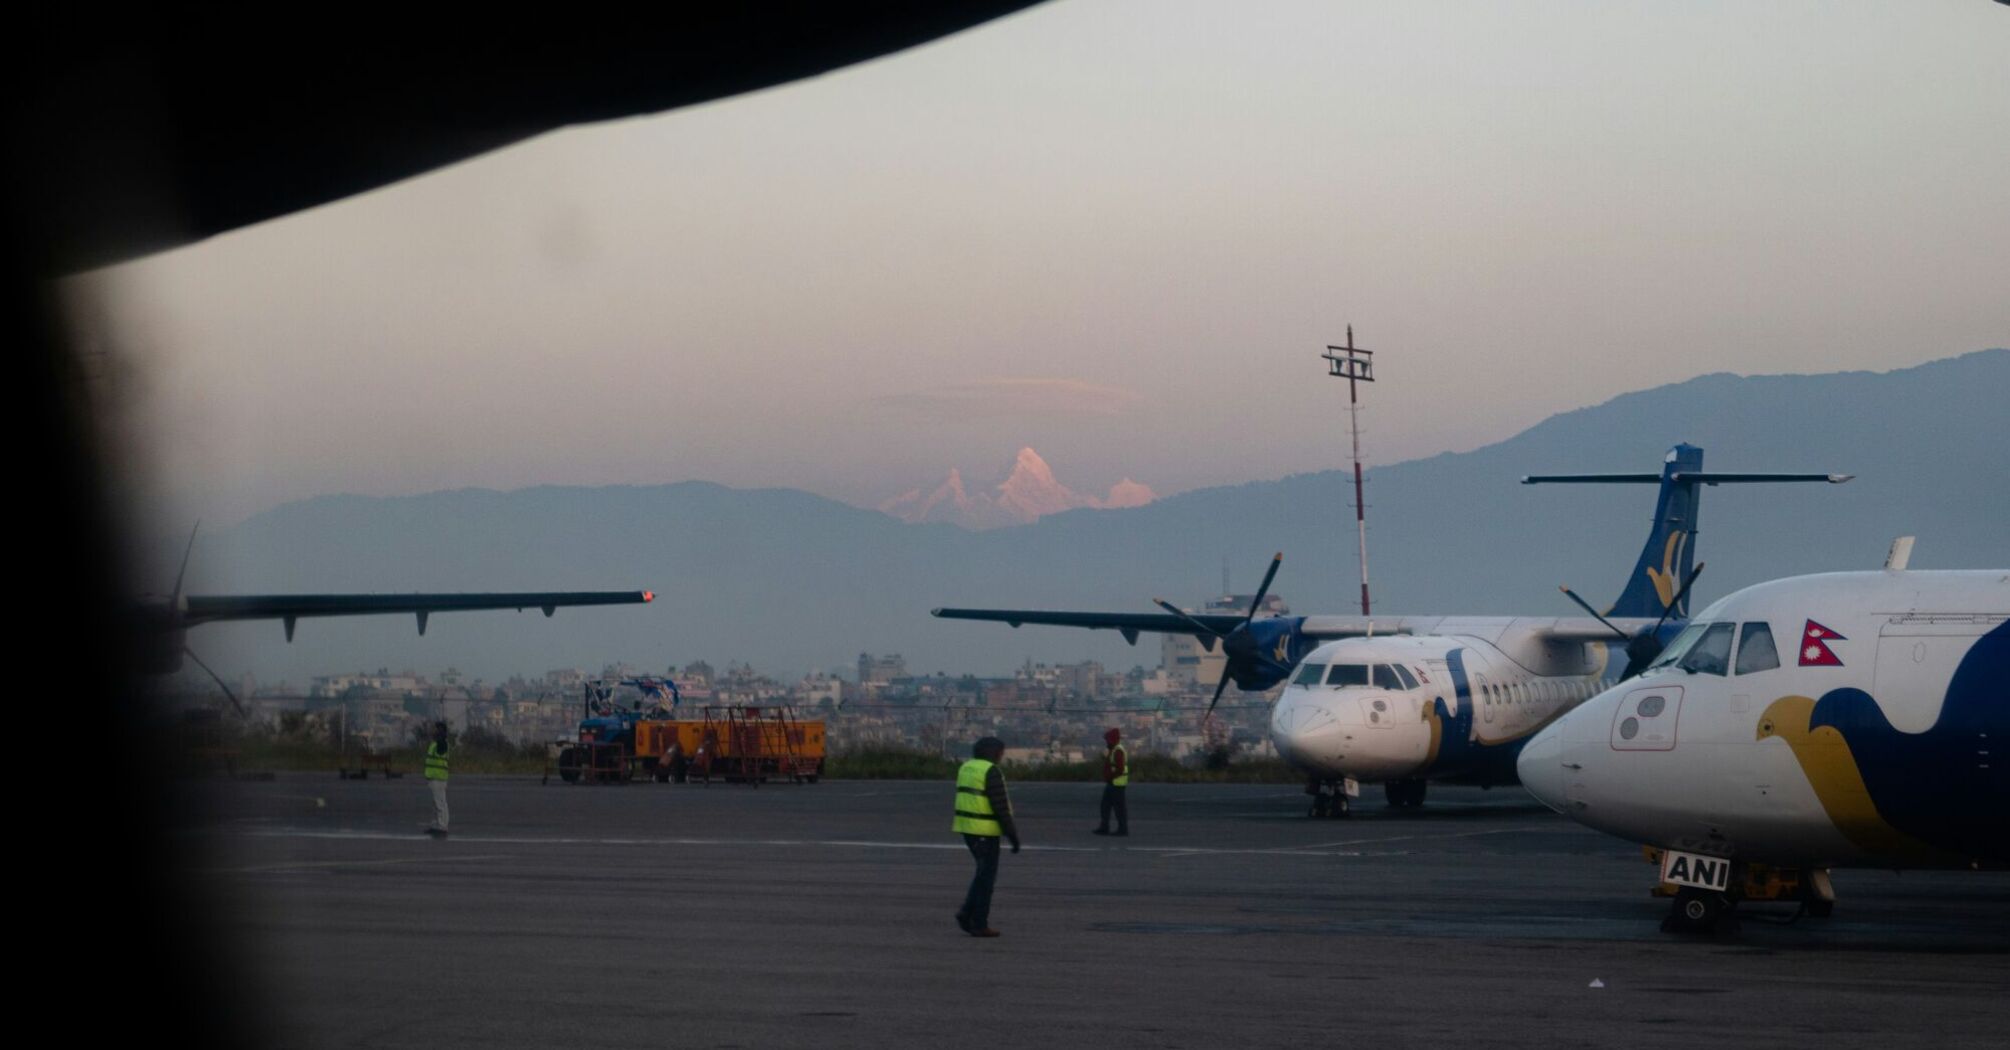 The Himalchuli peaks visible at early morning from Tribhuvan International Airport, Kathmandu